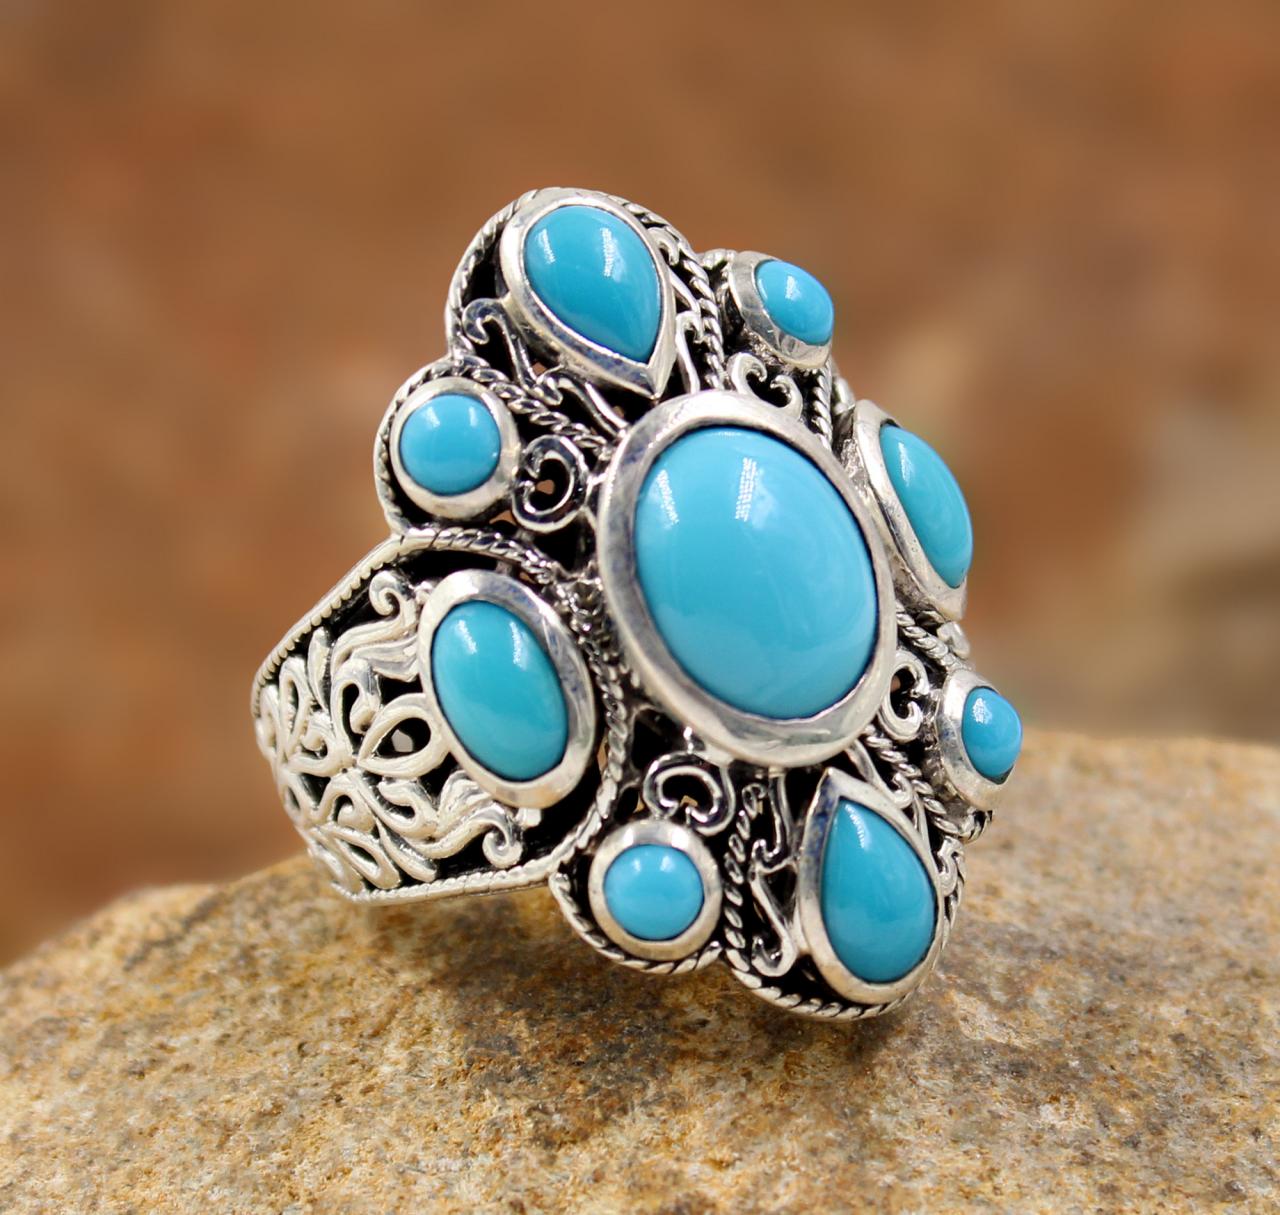 Exclusive Sleeping Beauty Turquoise Ring,oxidized 925 Sterling Silver Bali Ring,valentine Gift,ornate Ring, Mr1245